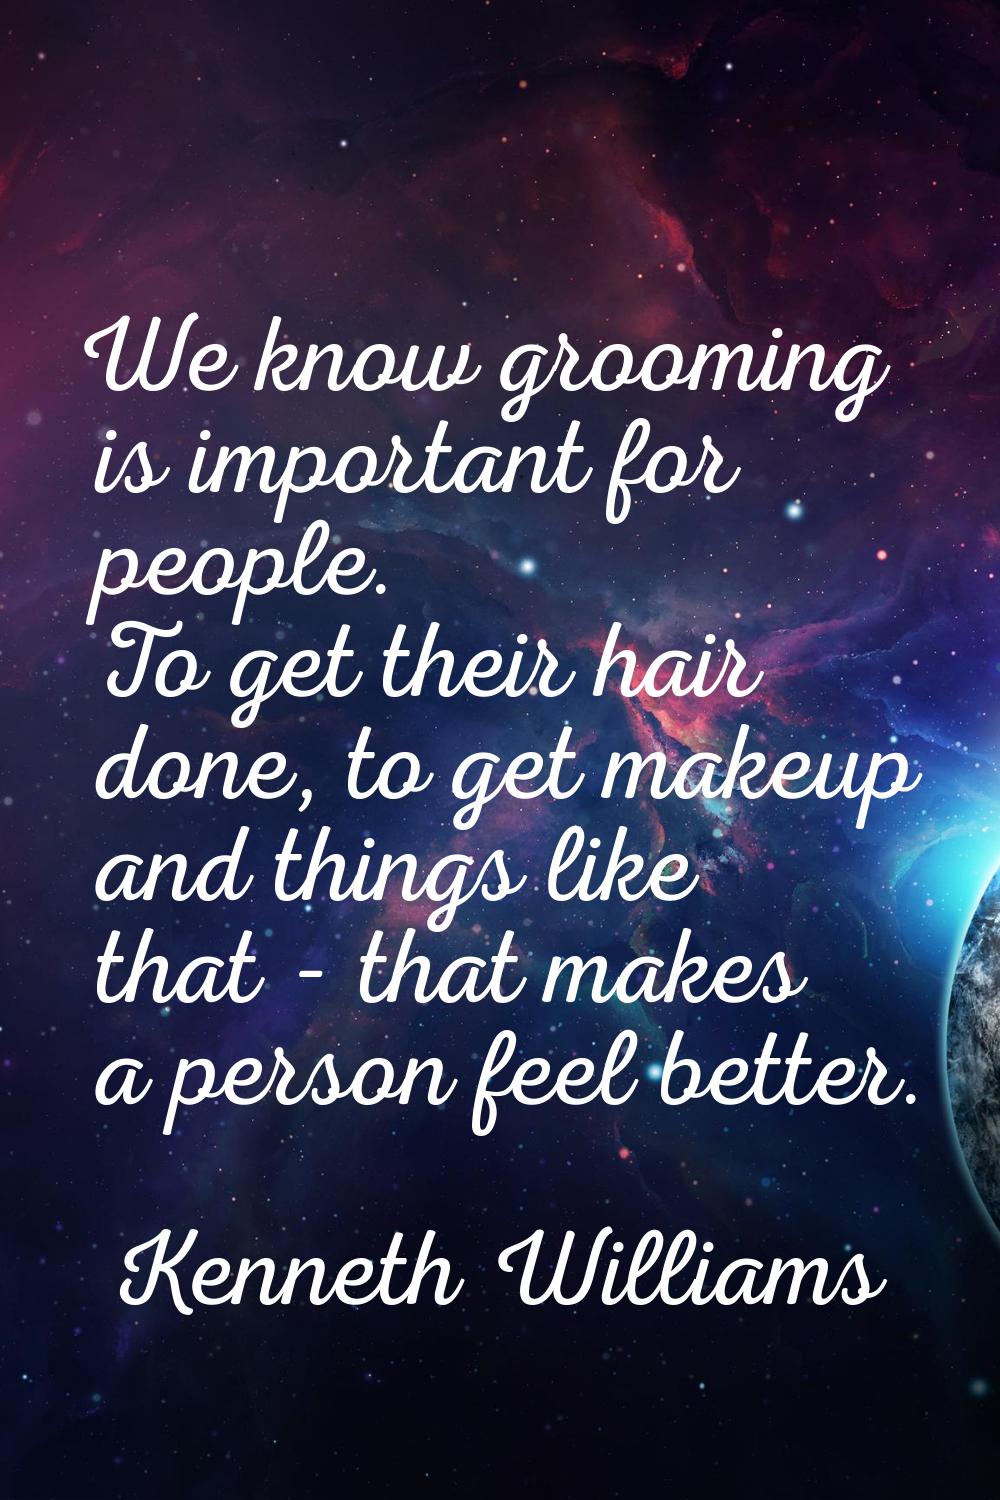 We know grooming is important for people. To get their hair done, to get makeup and things like tha